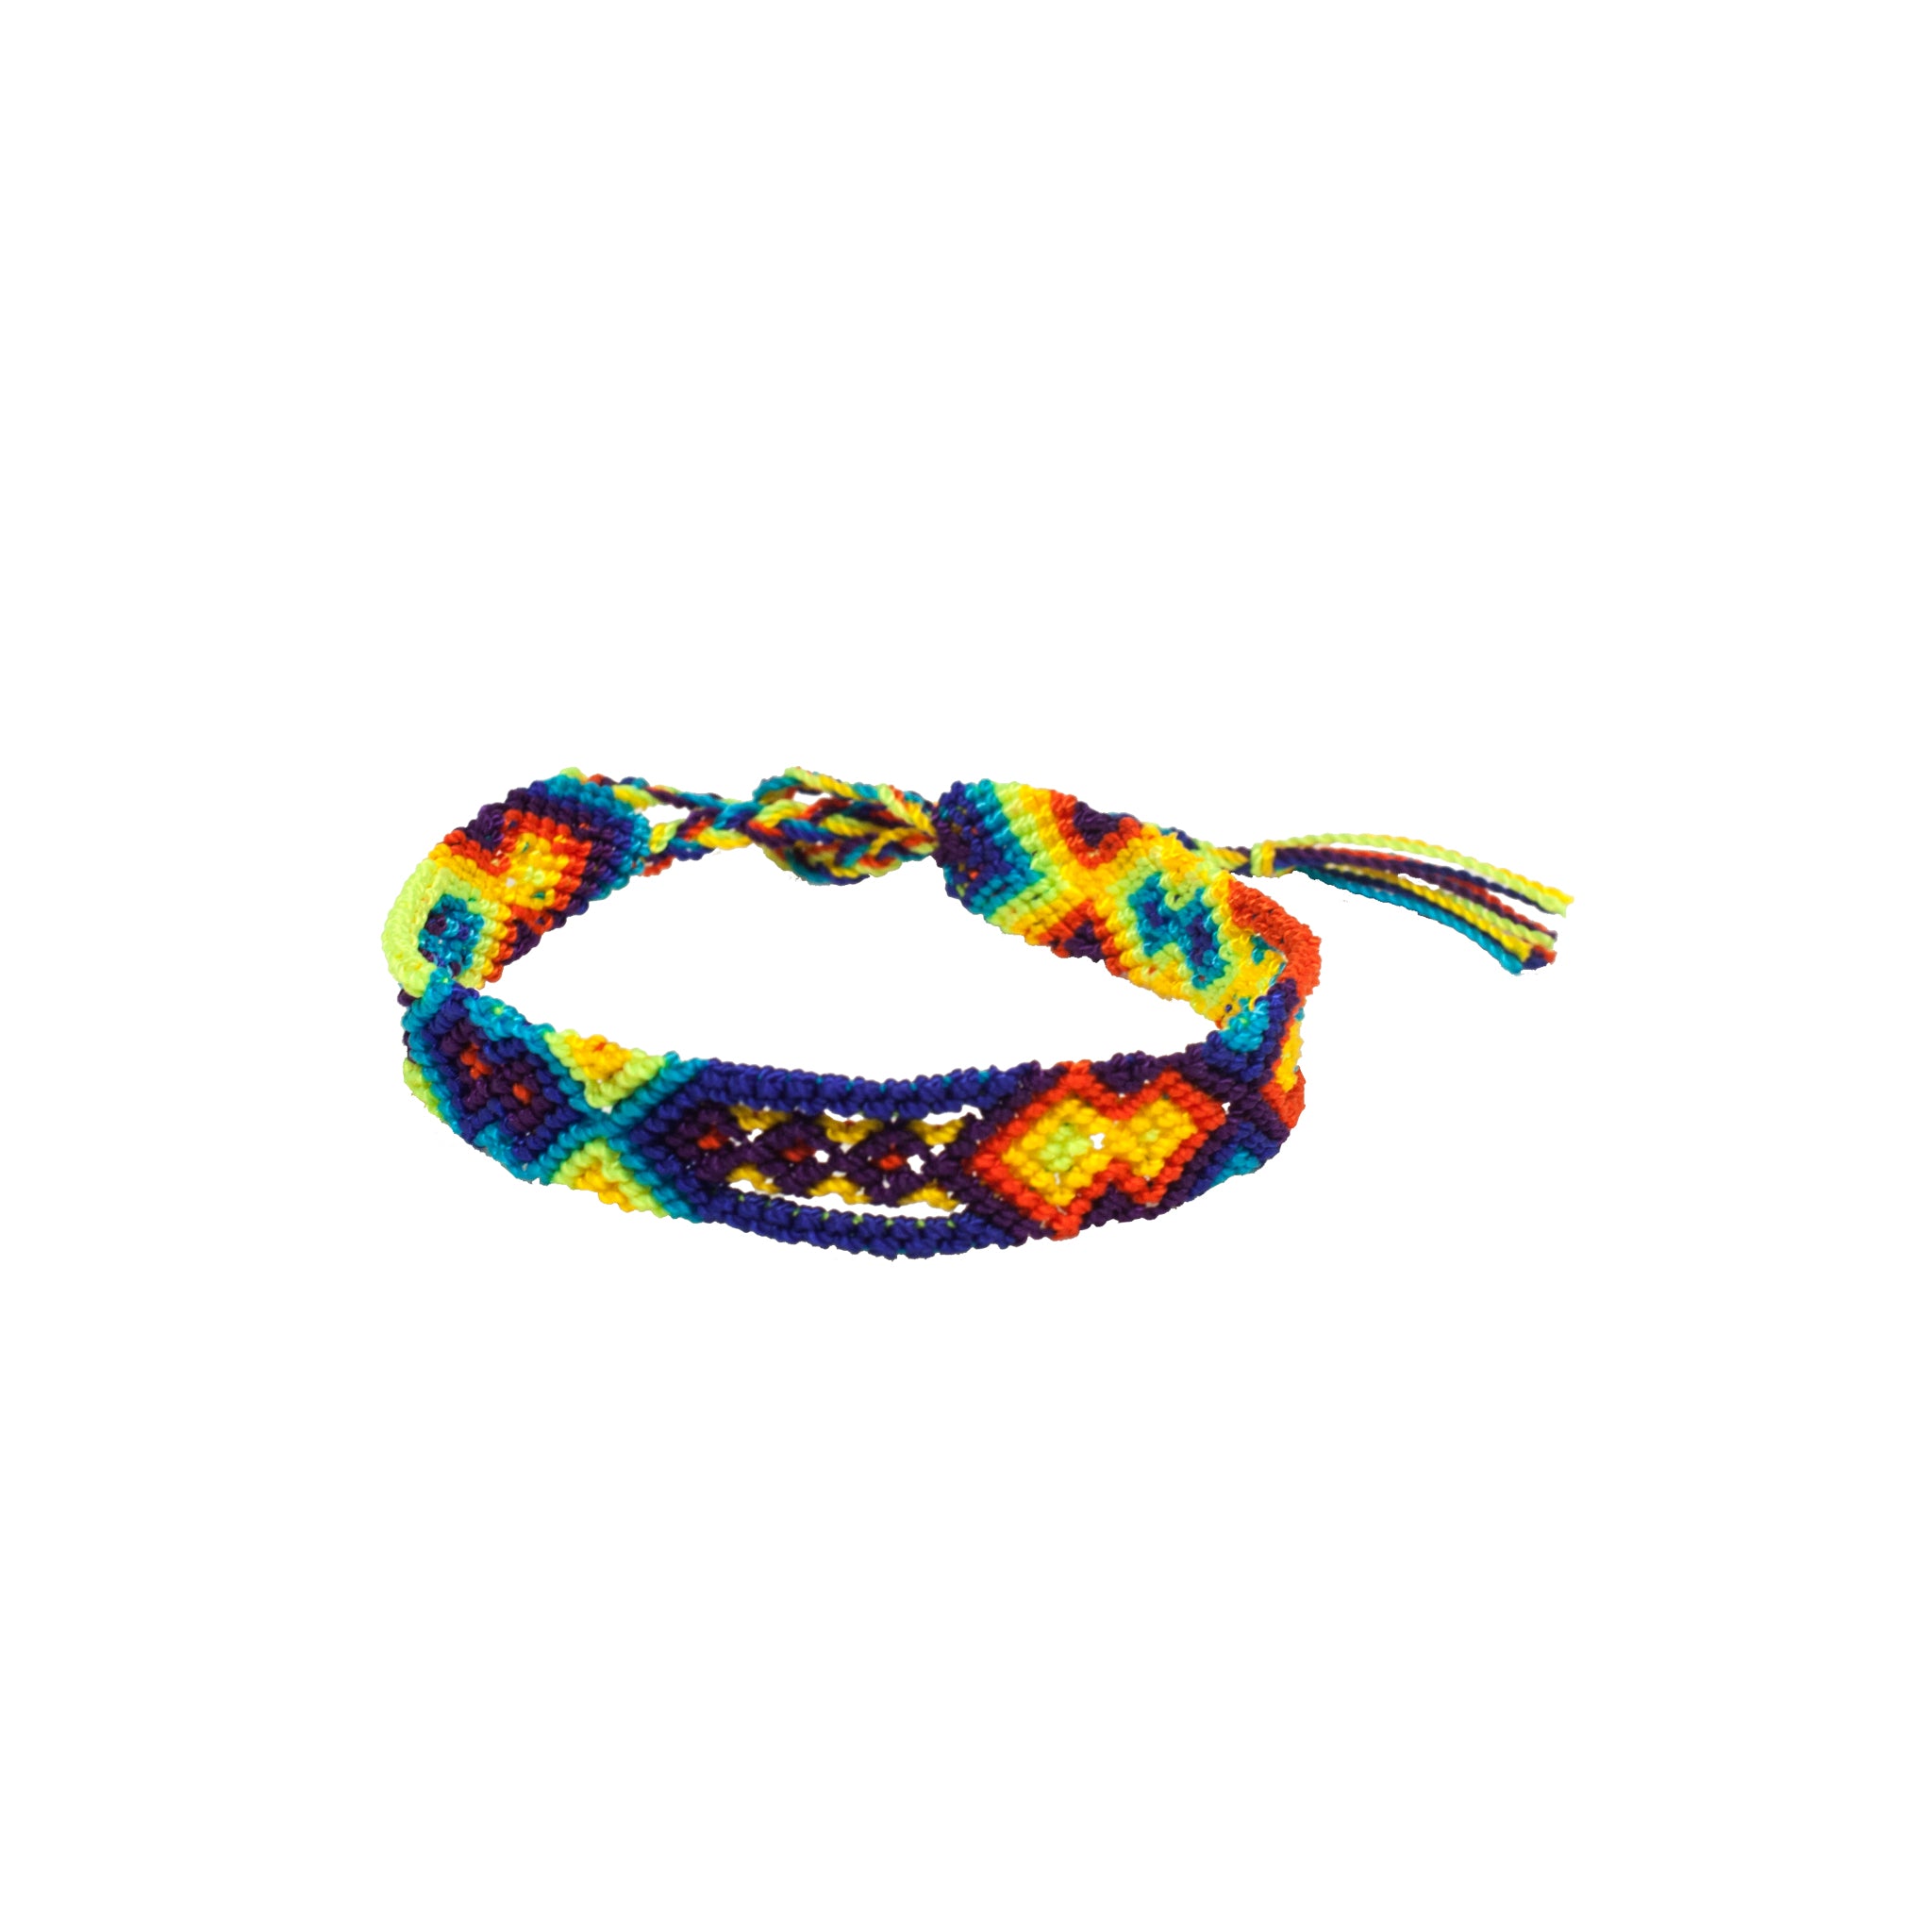 The scientific importance of the Friendship bracelet. – Alice Made This